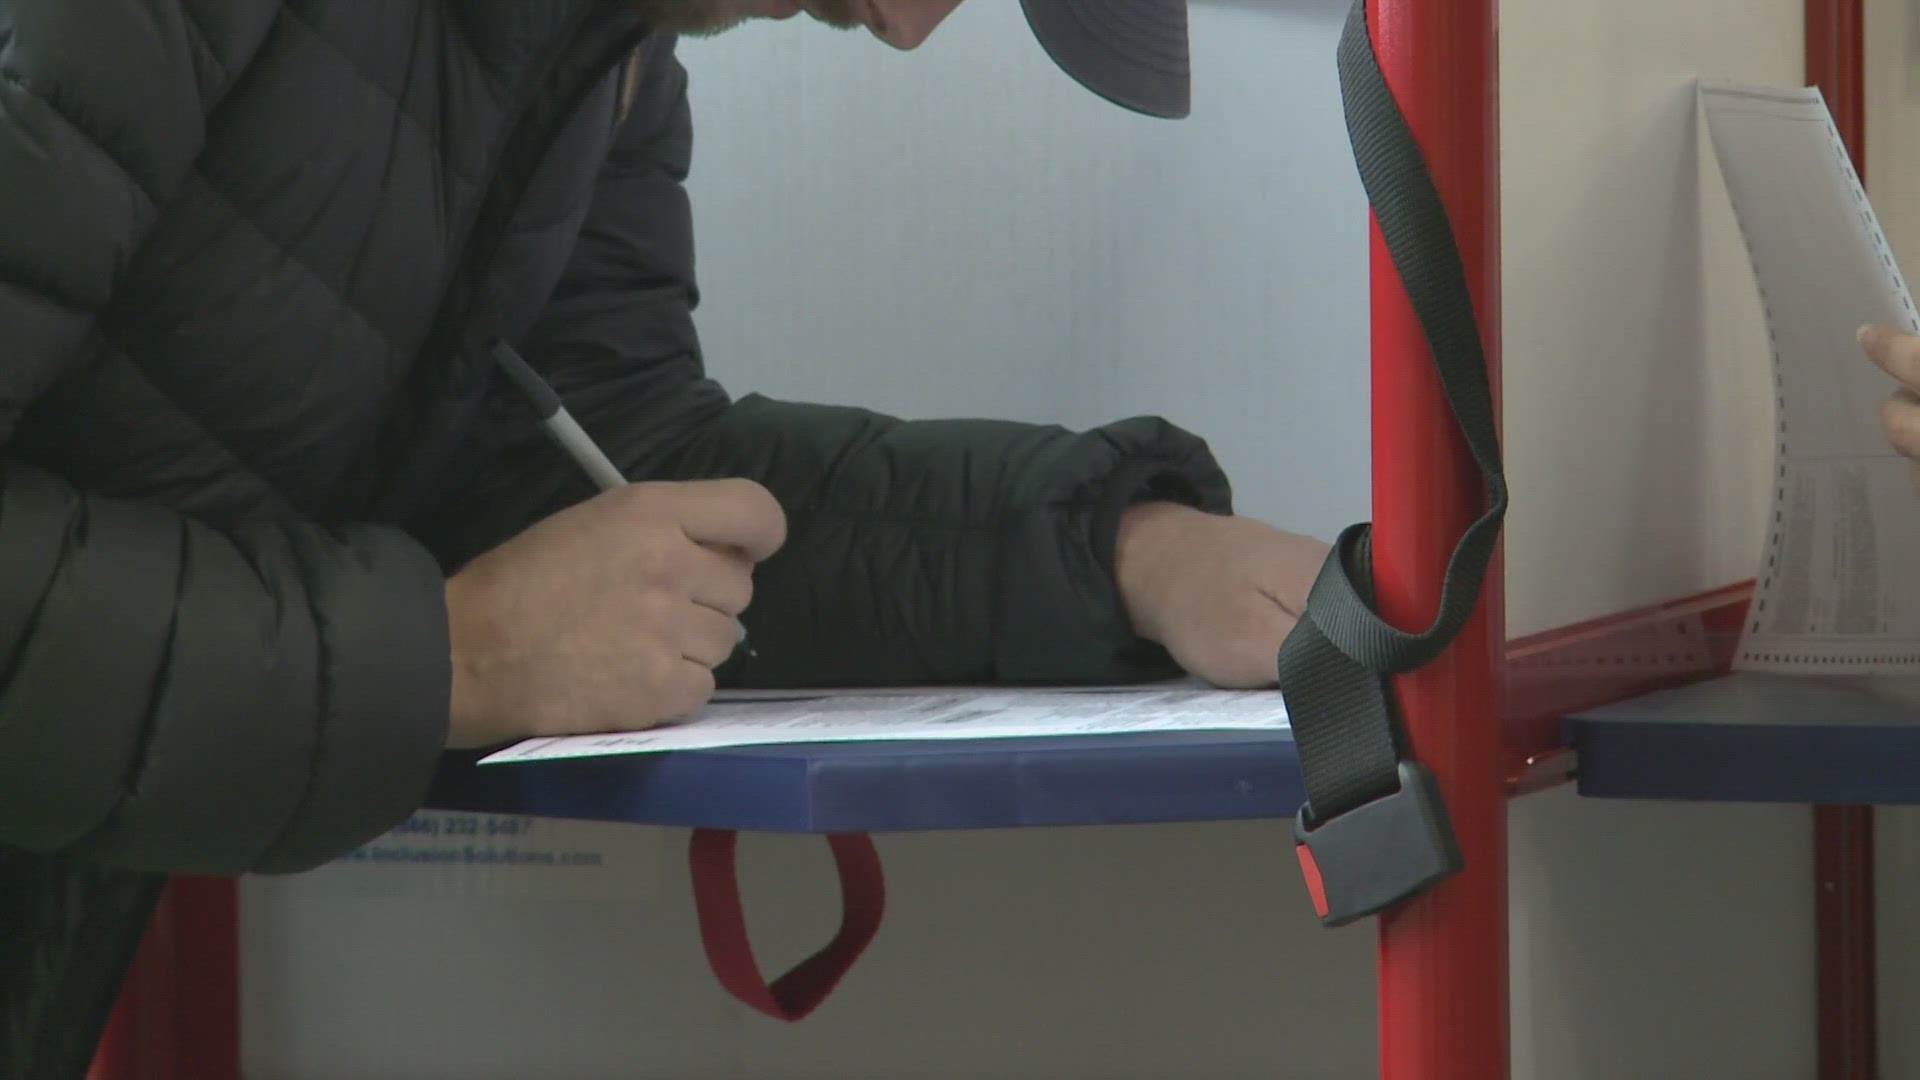 Maine voters will decide the fate of eight statewide ballot measures in an election Tuesday.